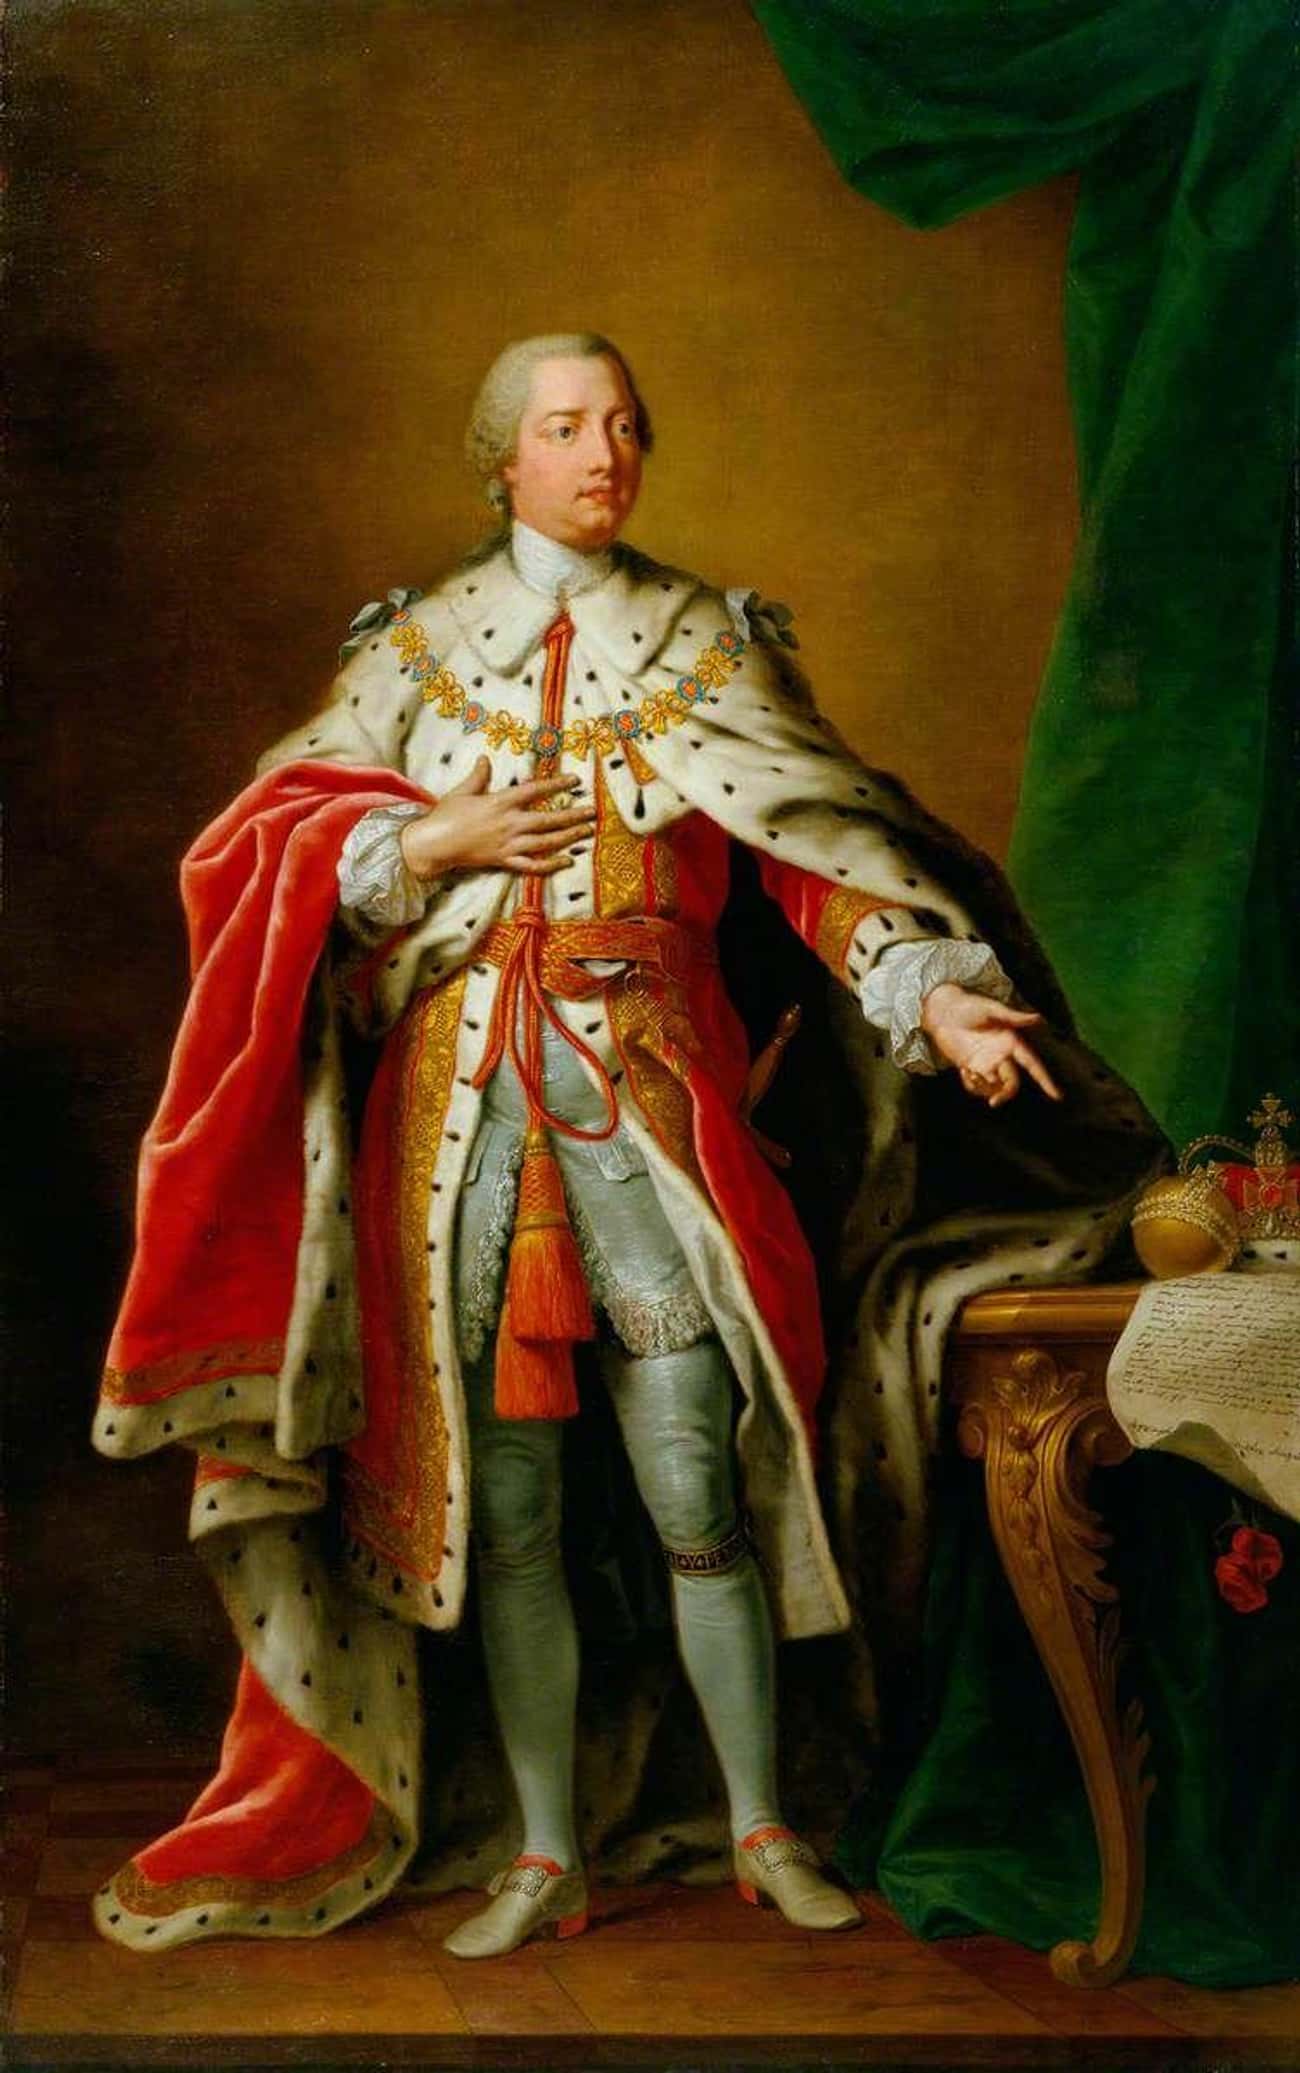 Medicines Used To Treat King George III Probably Caused Or Worsened His Madness